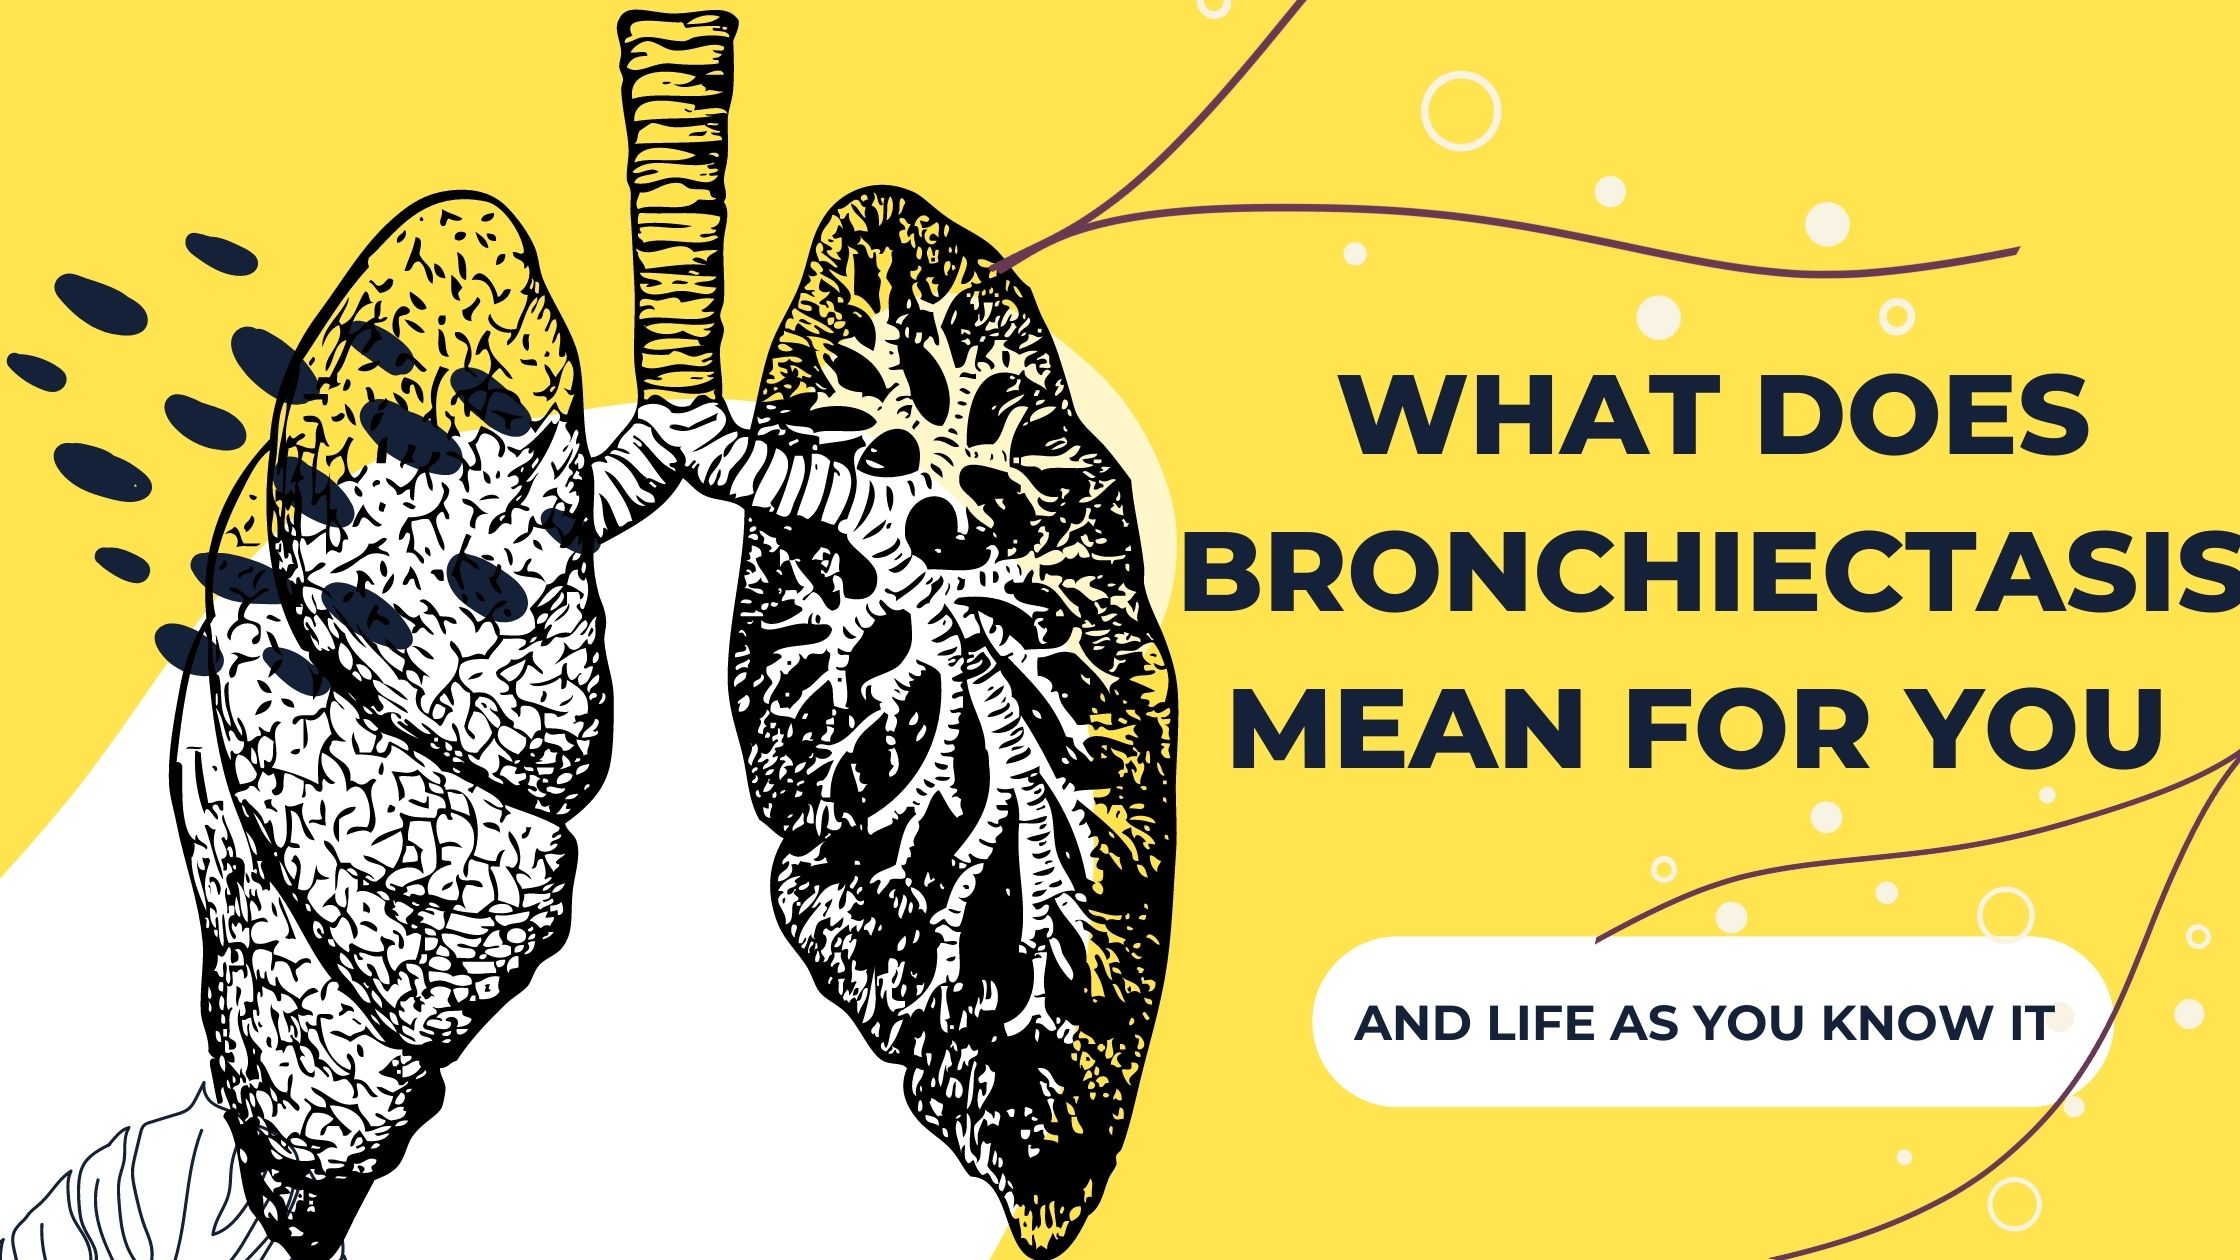 What Does Bronchiectasis Mean for You